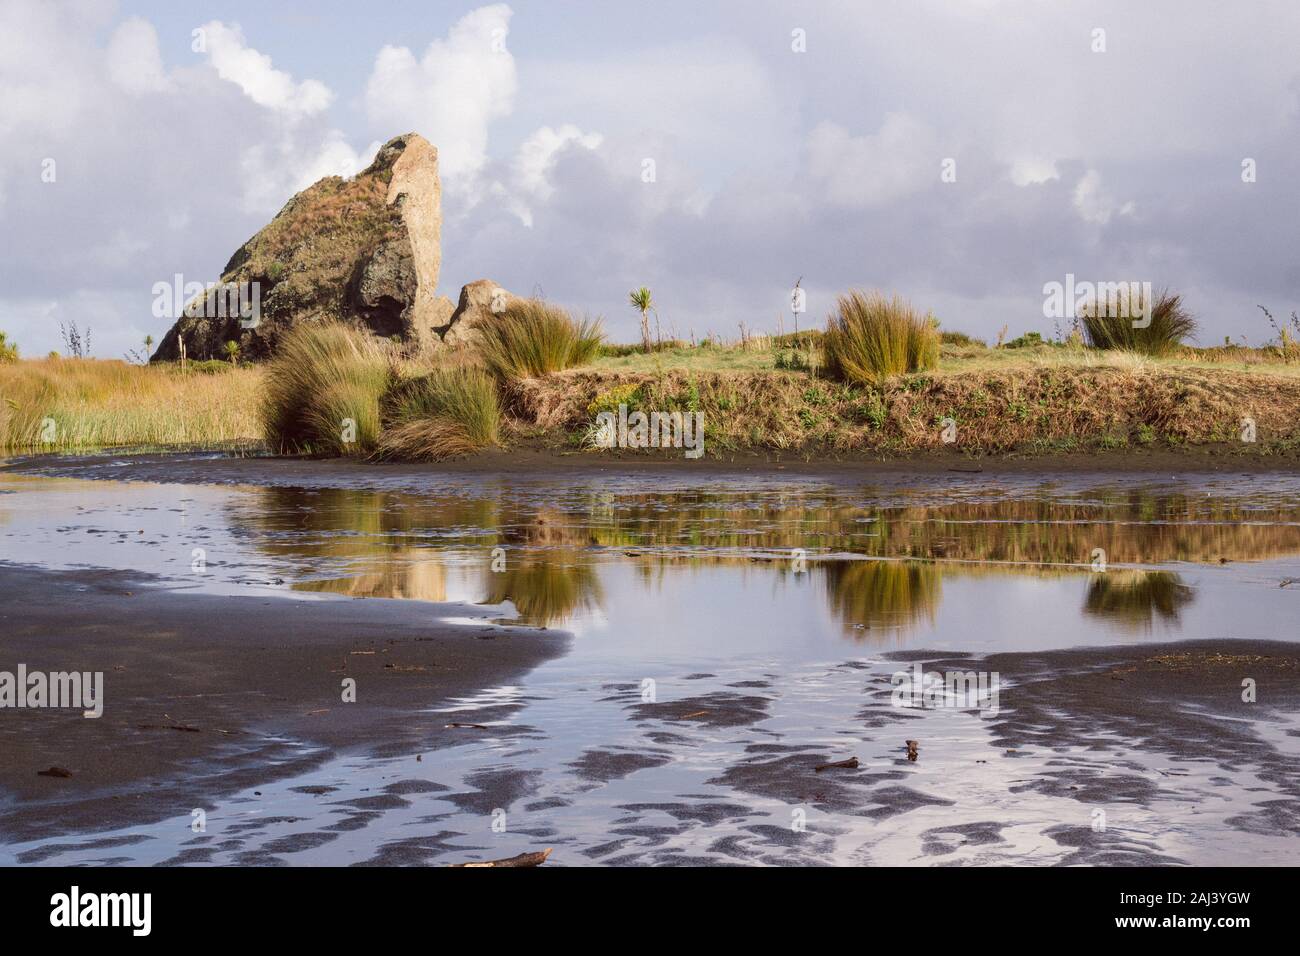 A rock formation reflected in the river at Whatipu Beach,Waitakere Ranges, Auckland, New Zealand. Stock Photo